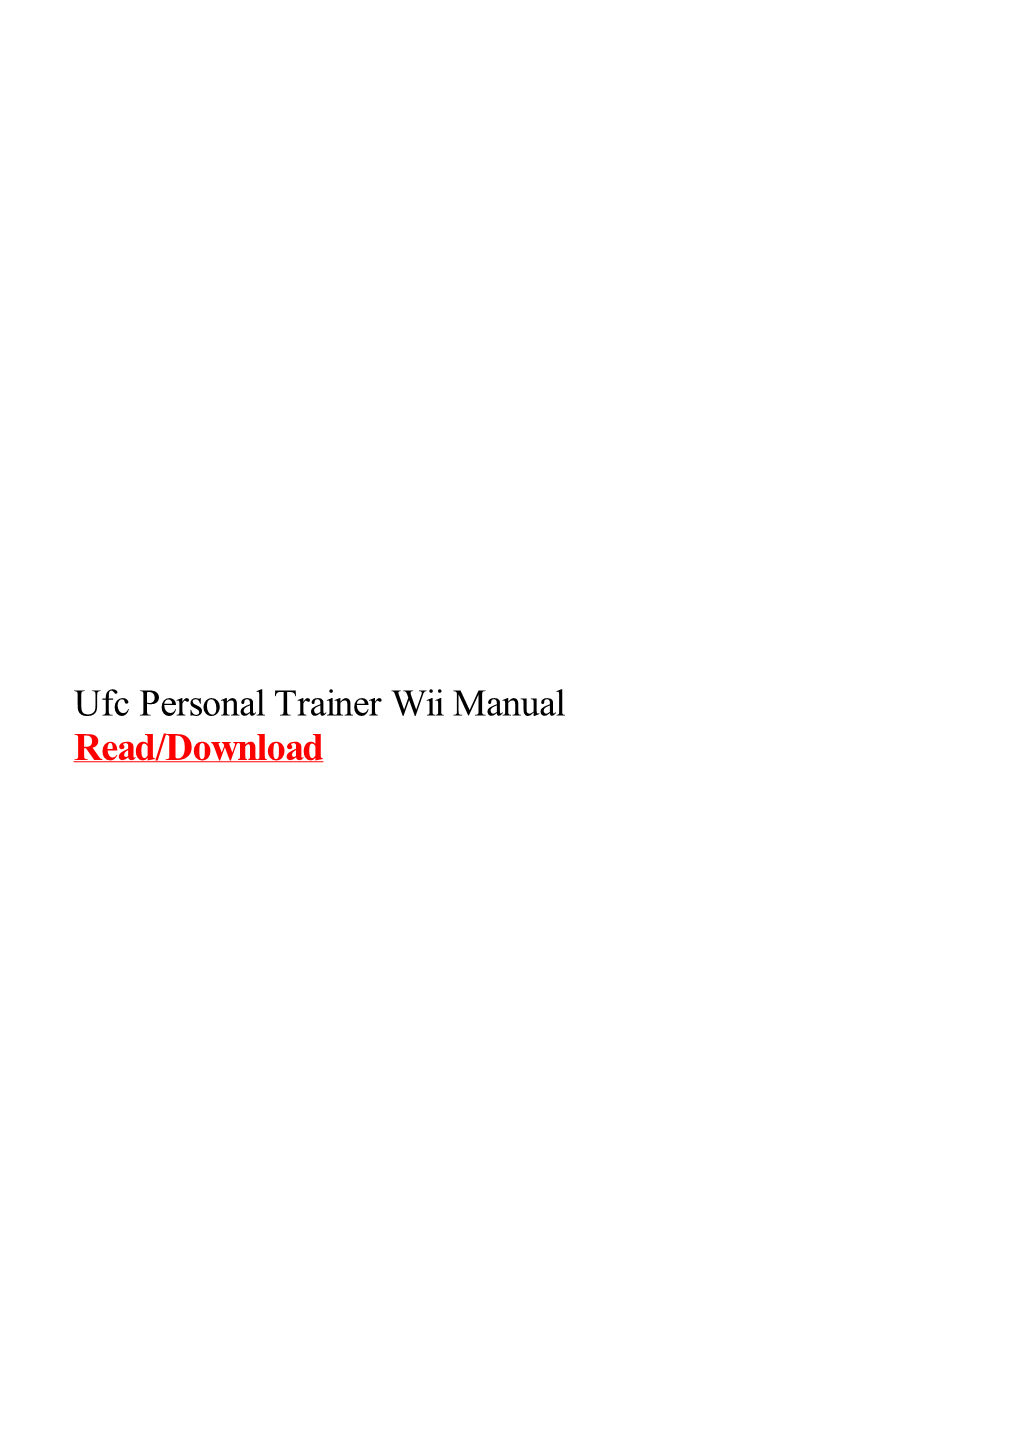 Ufc Personal Trainer Wii Manual